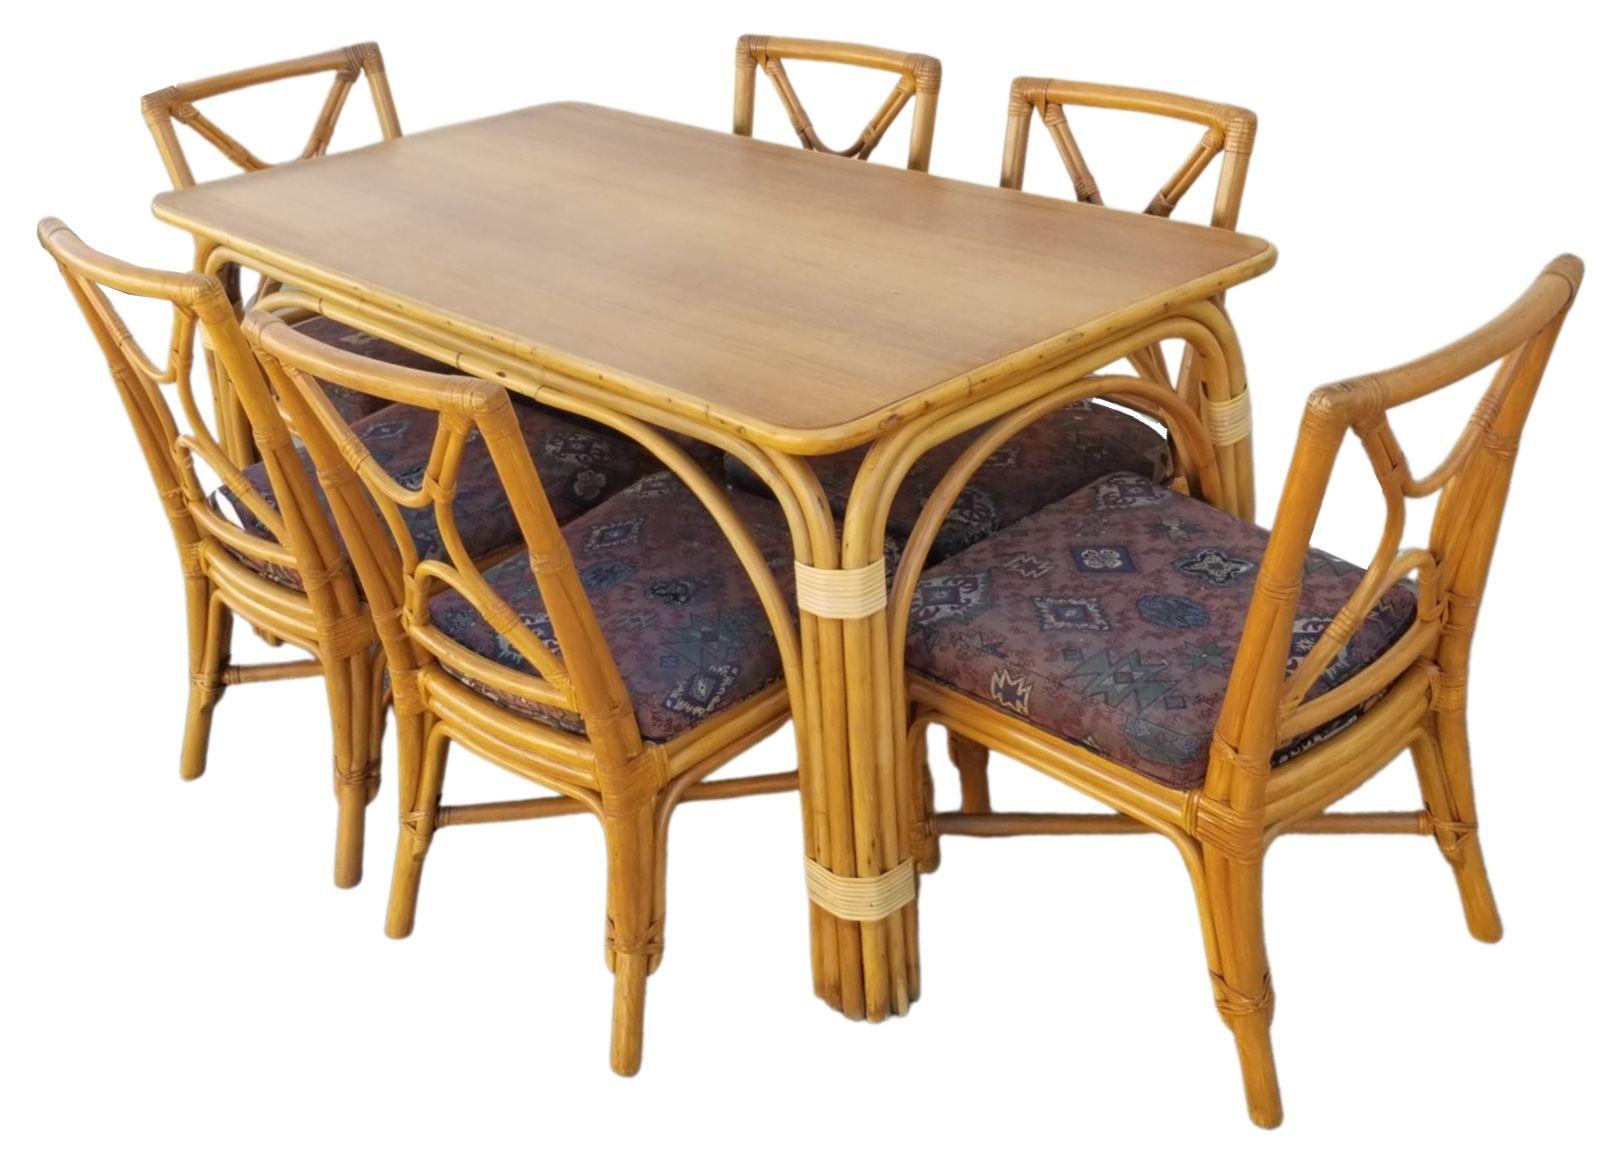 Restored rattan dining set featuring a six-strand arch legged dining table with Mahogany look Formica top and six X-Back chairs.

Dimensions:
Table: H 29